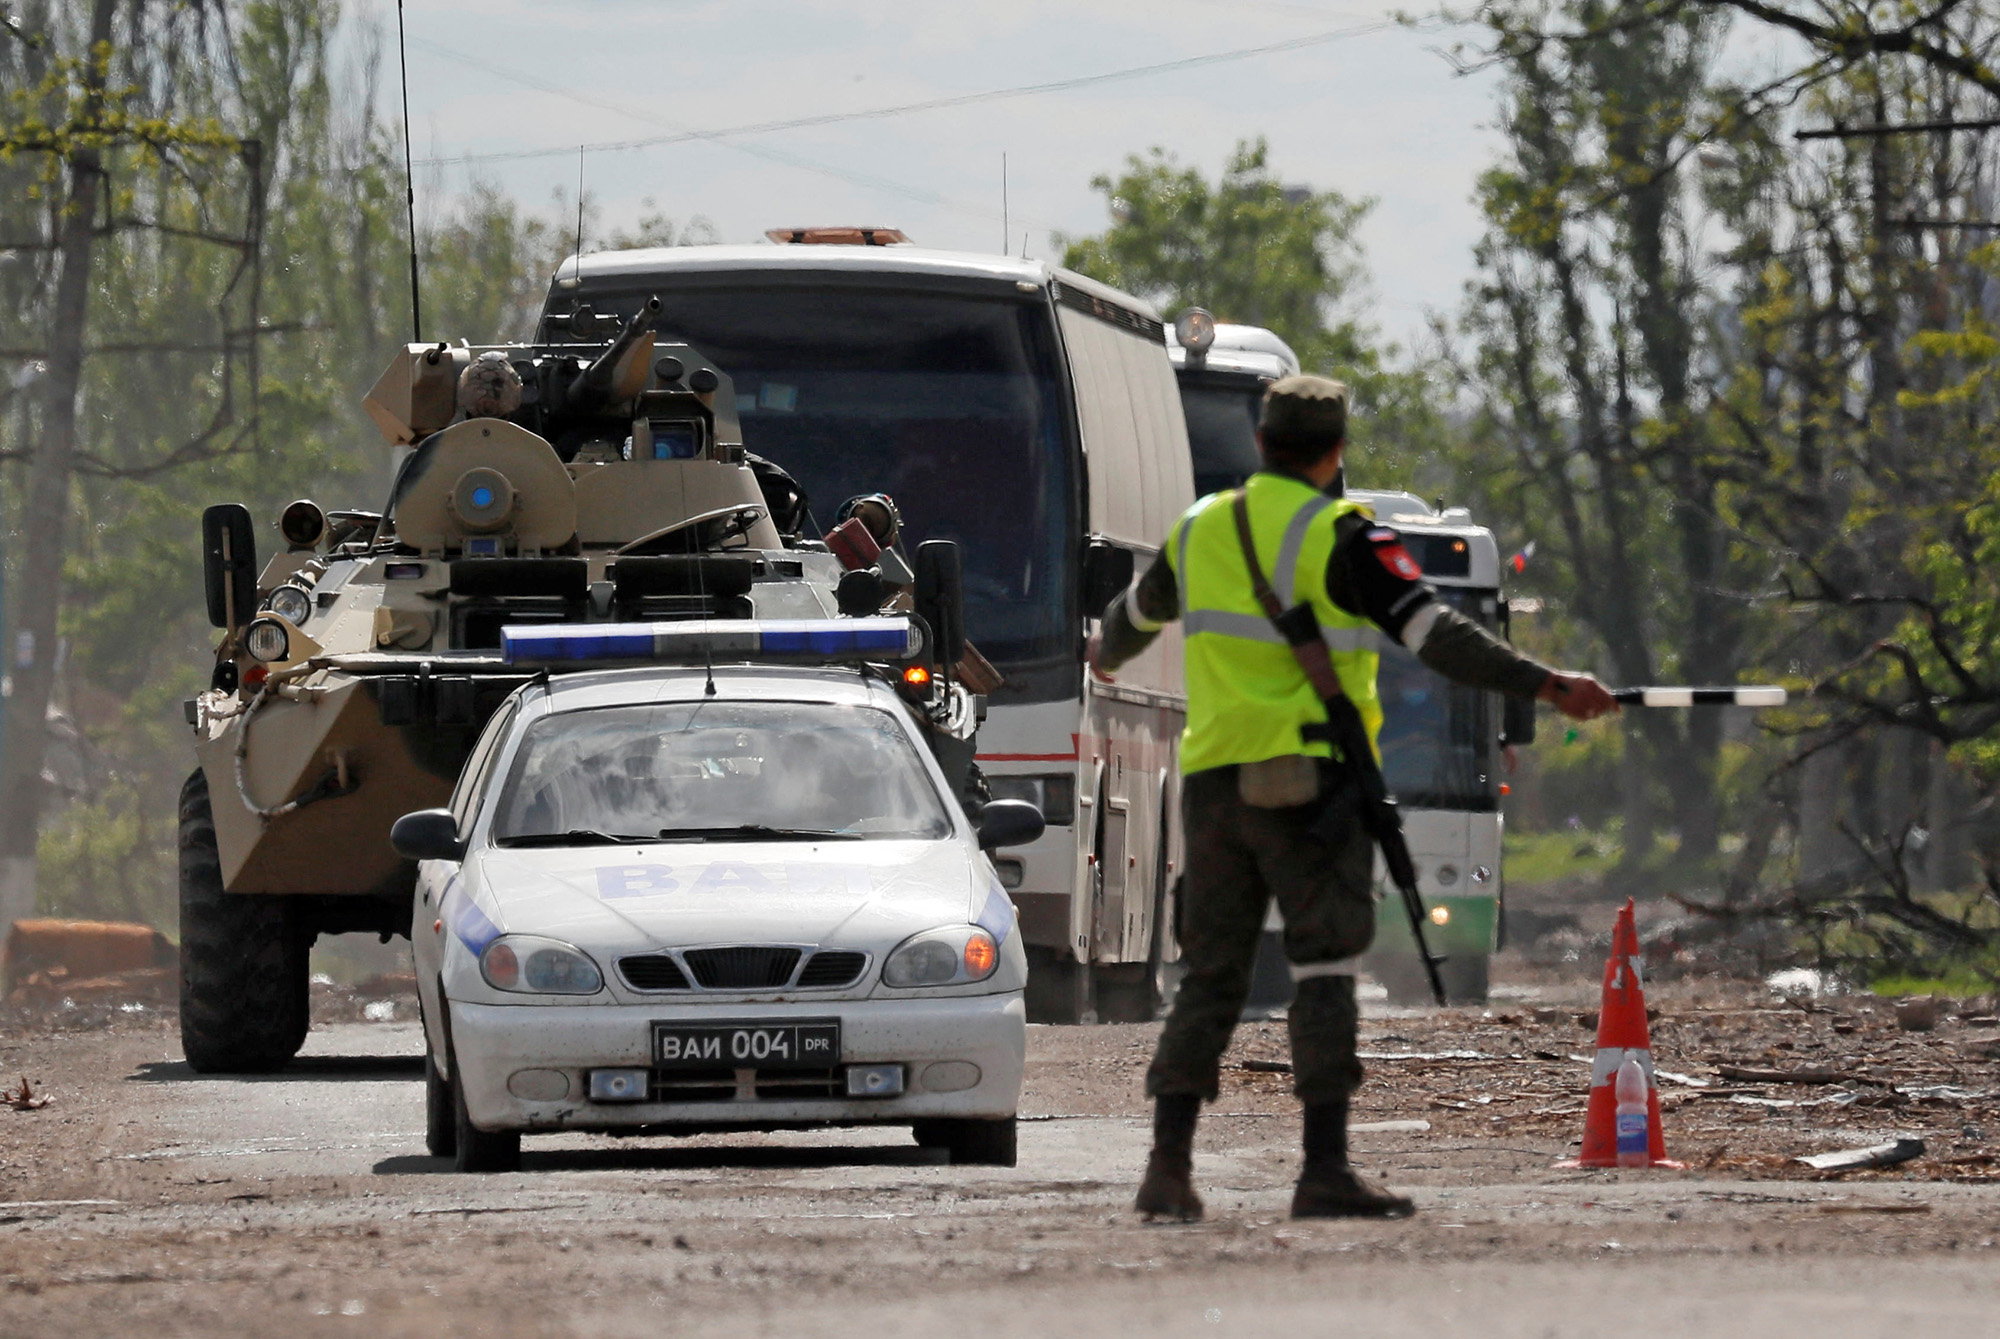 Buses carrying members of Ukrainian forces who have surrendered from the Azovstal steel works in Mariupol, Ukraine, drive away under escort of the pro-Russian military on May 17.